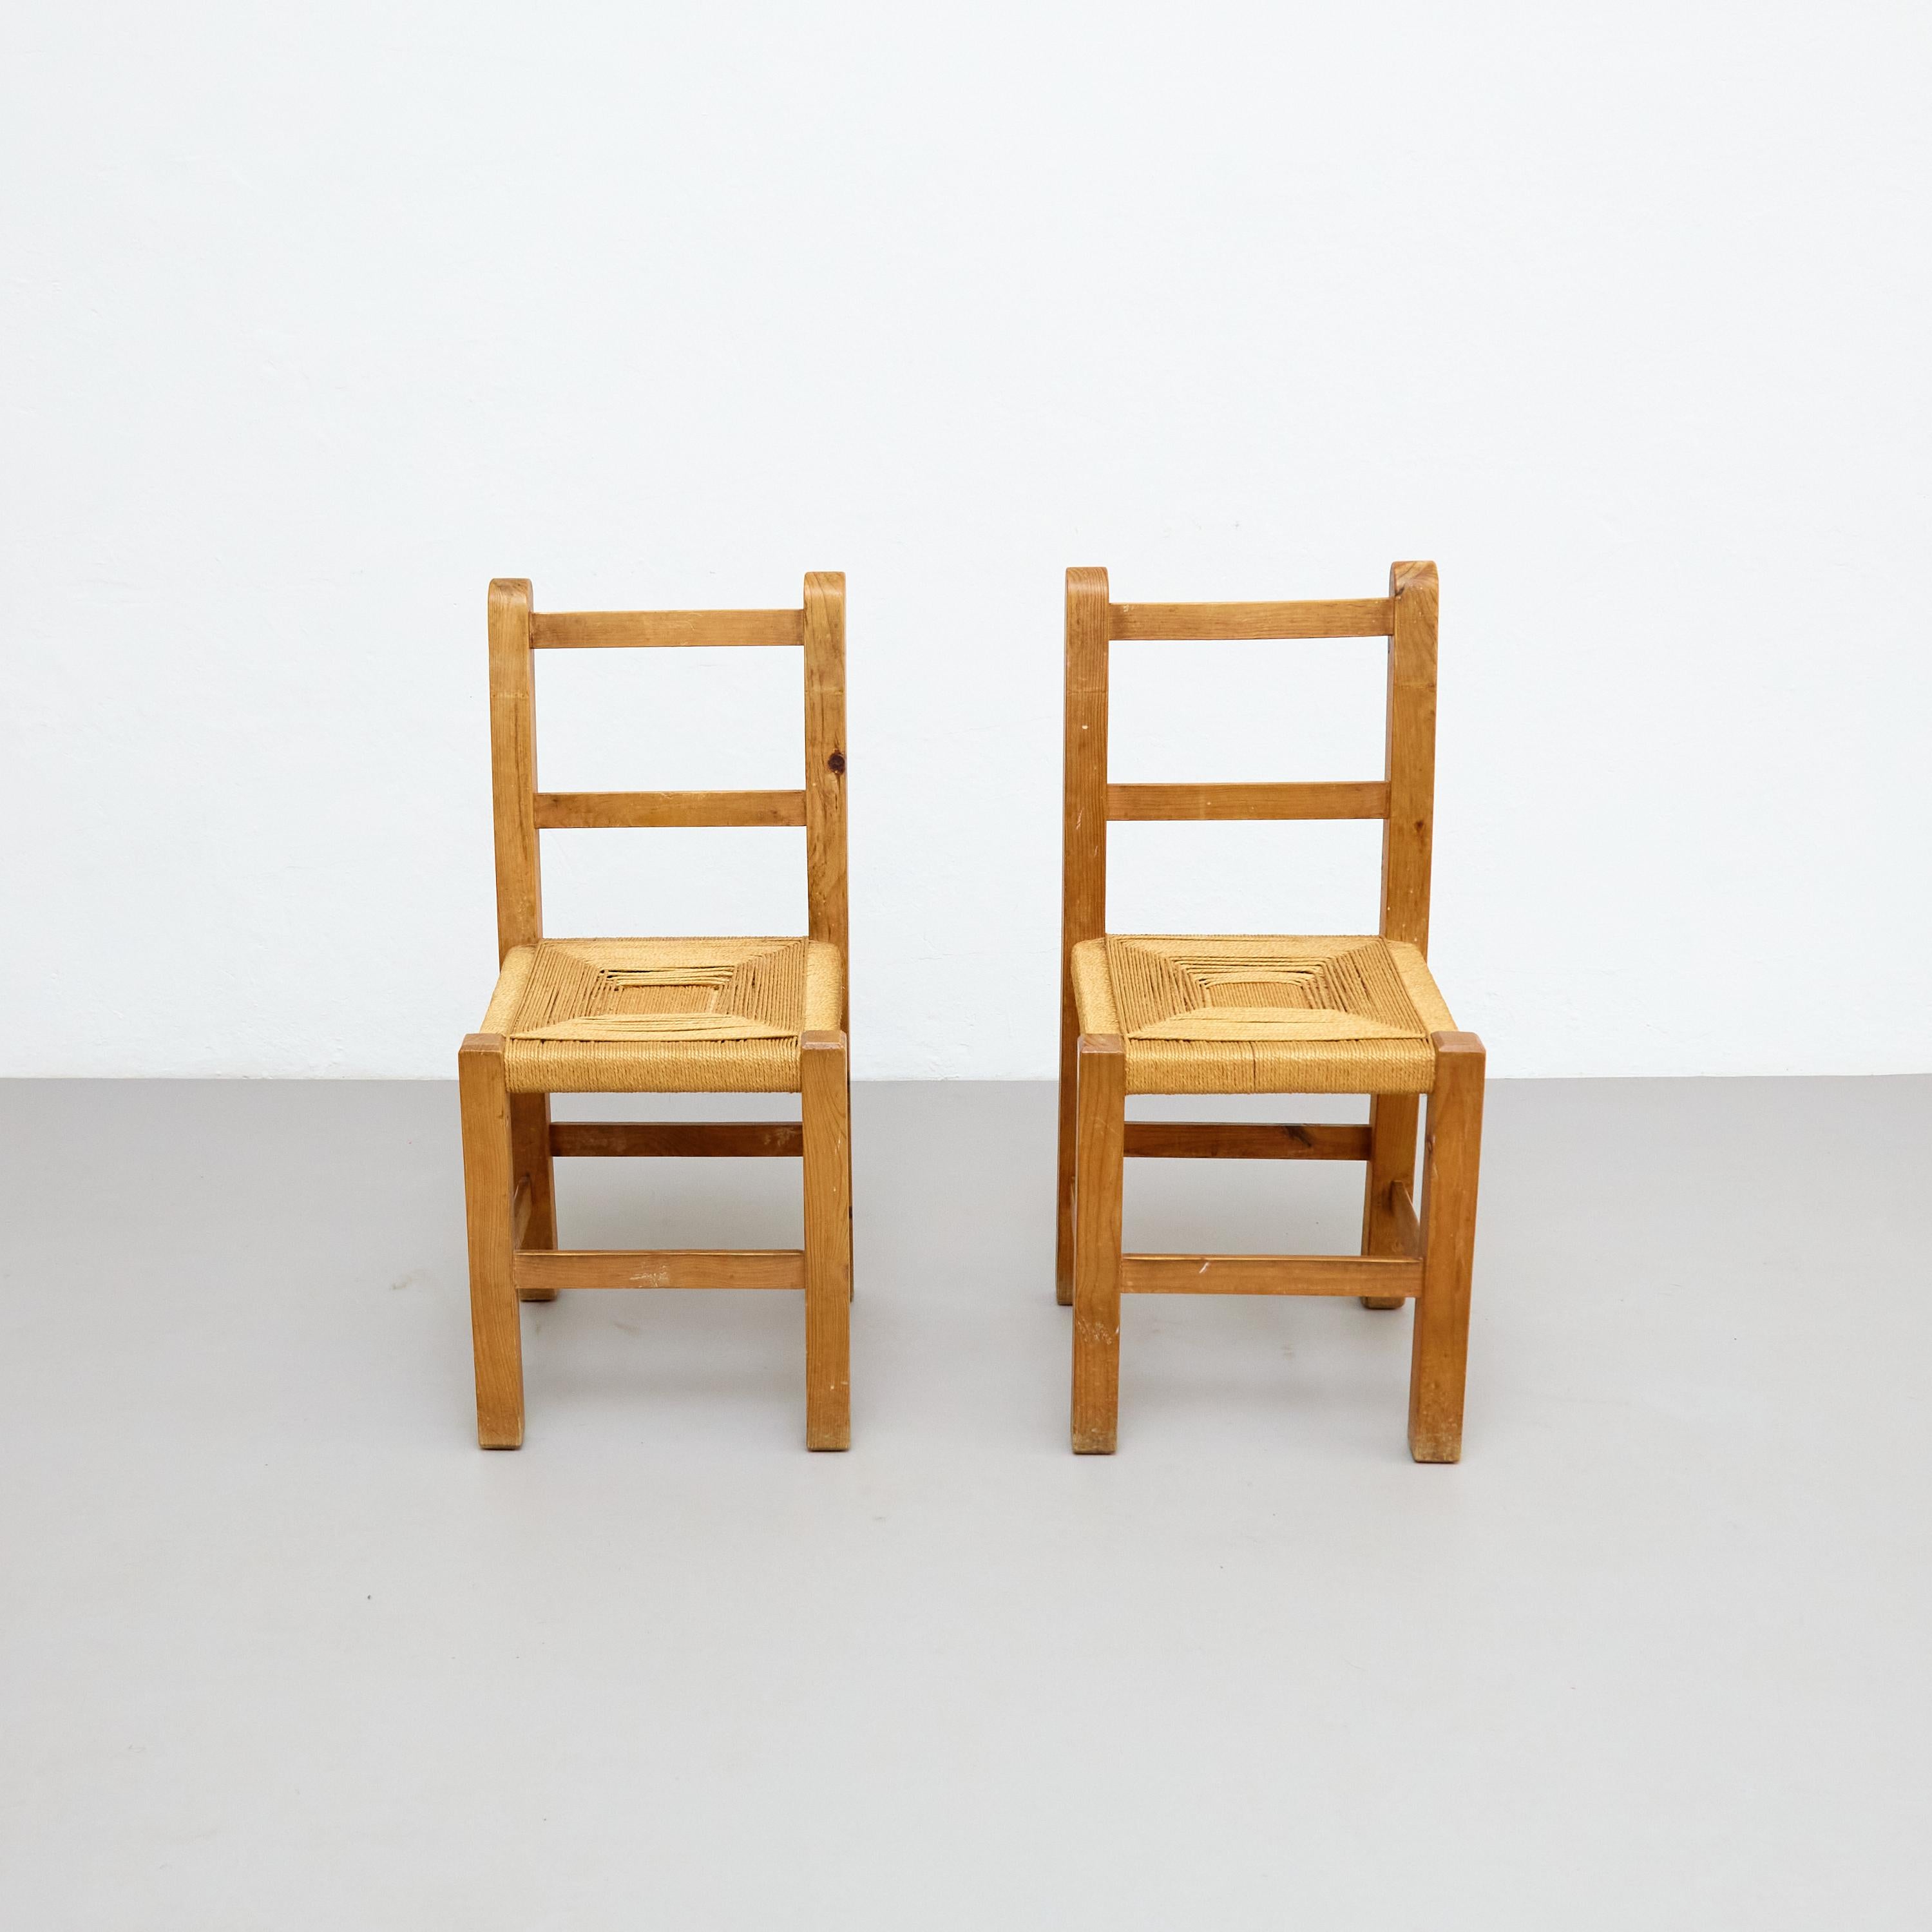 Pair of Mid-Century Modern Wood and Rattan French Rationalist Chairs, circa 1950 For Sale 1